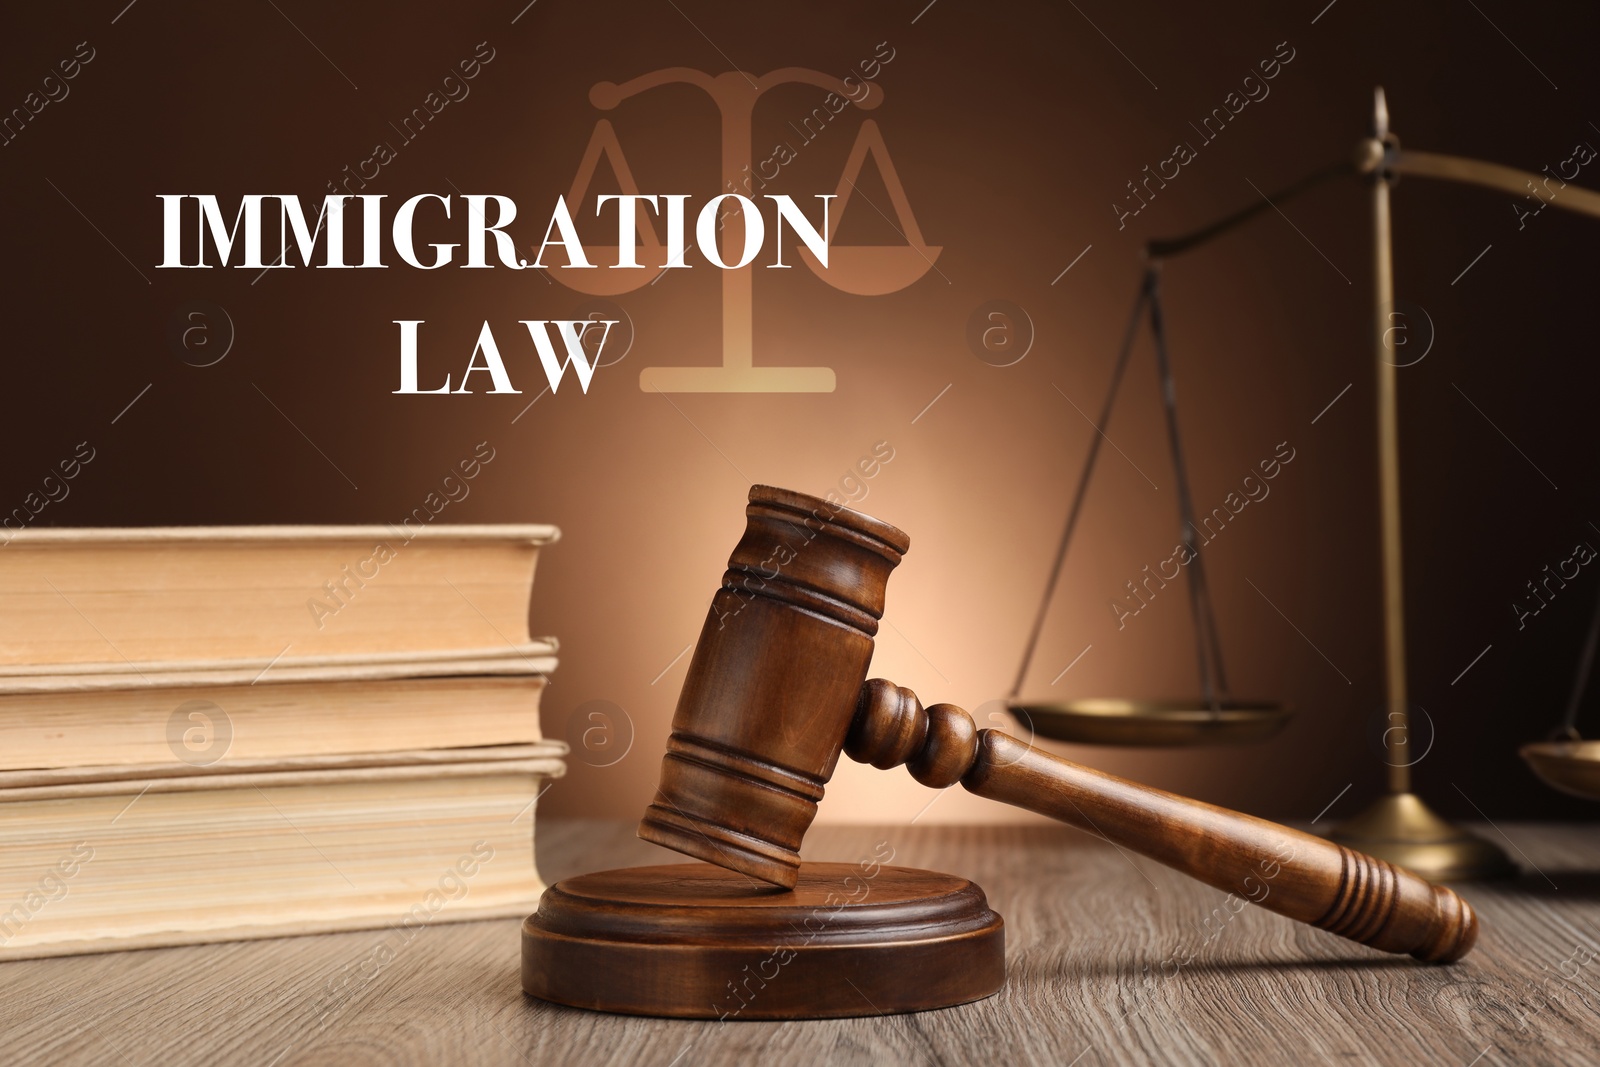 Image of Immigration law. Judge's gavel, scales of justice and books on wooden table against brown background